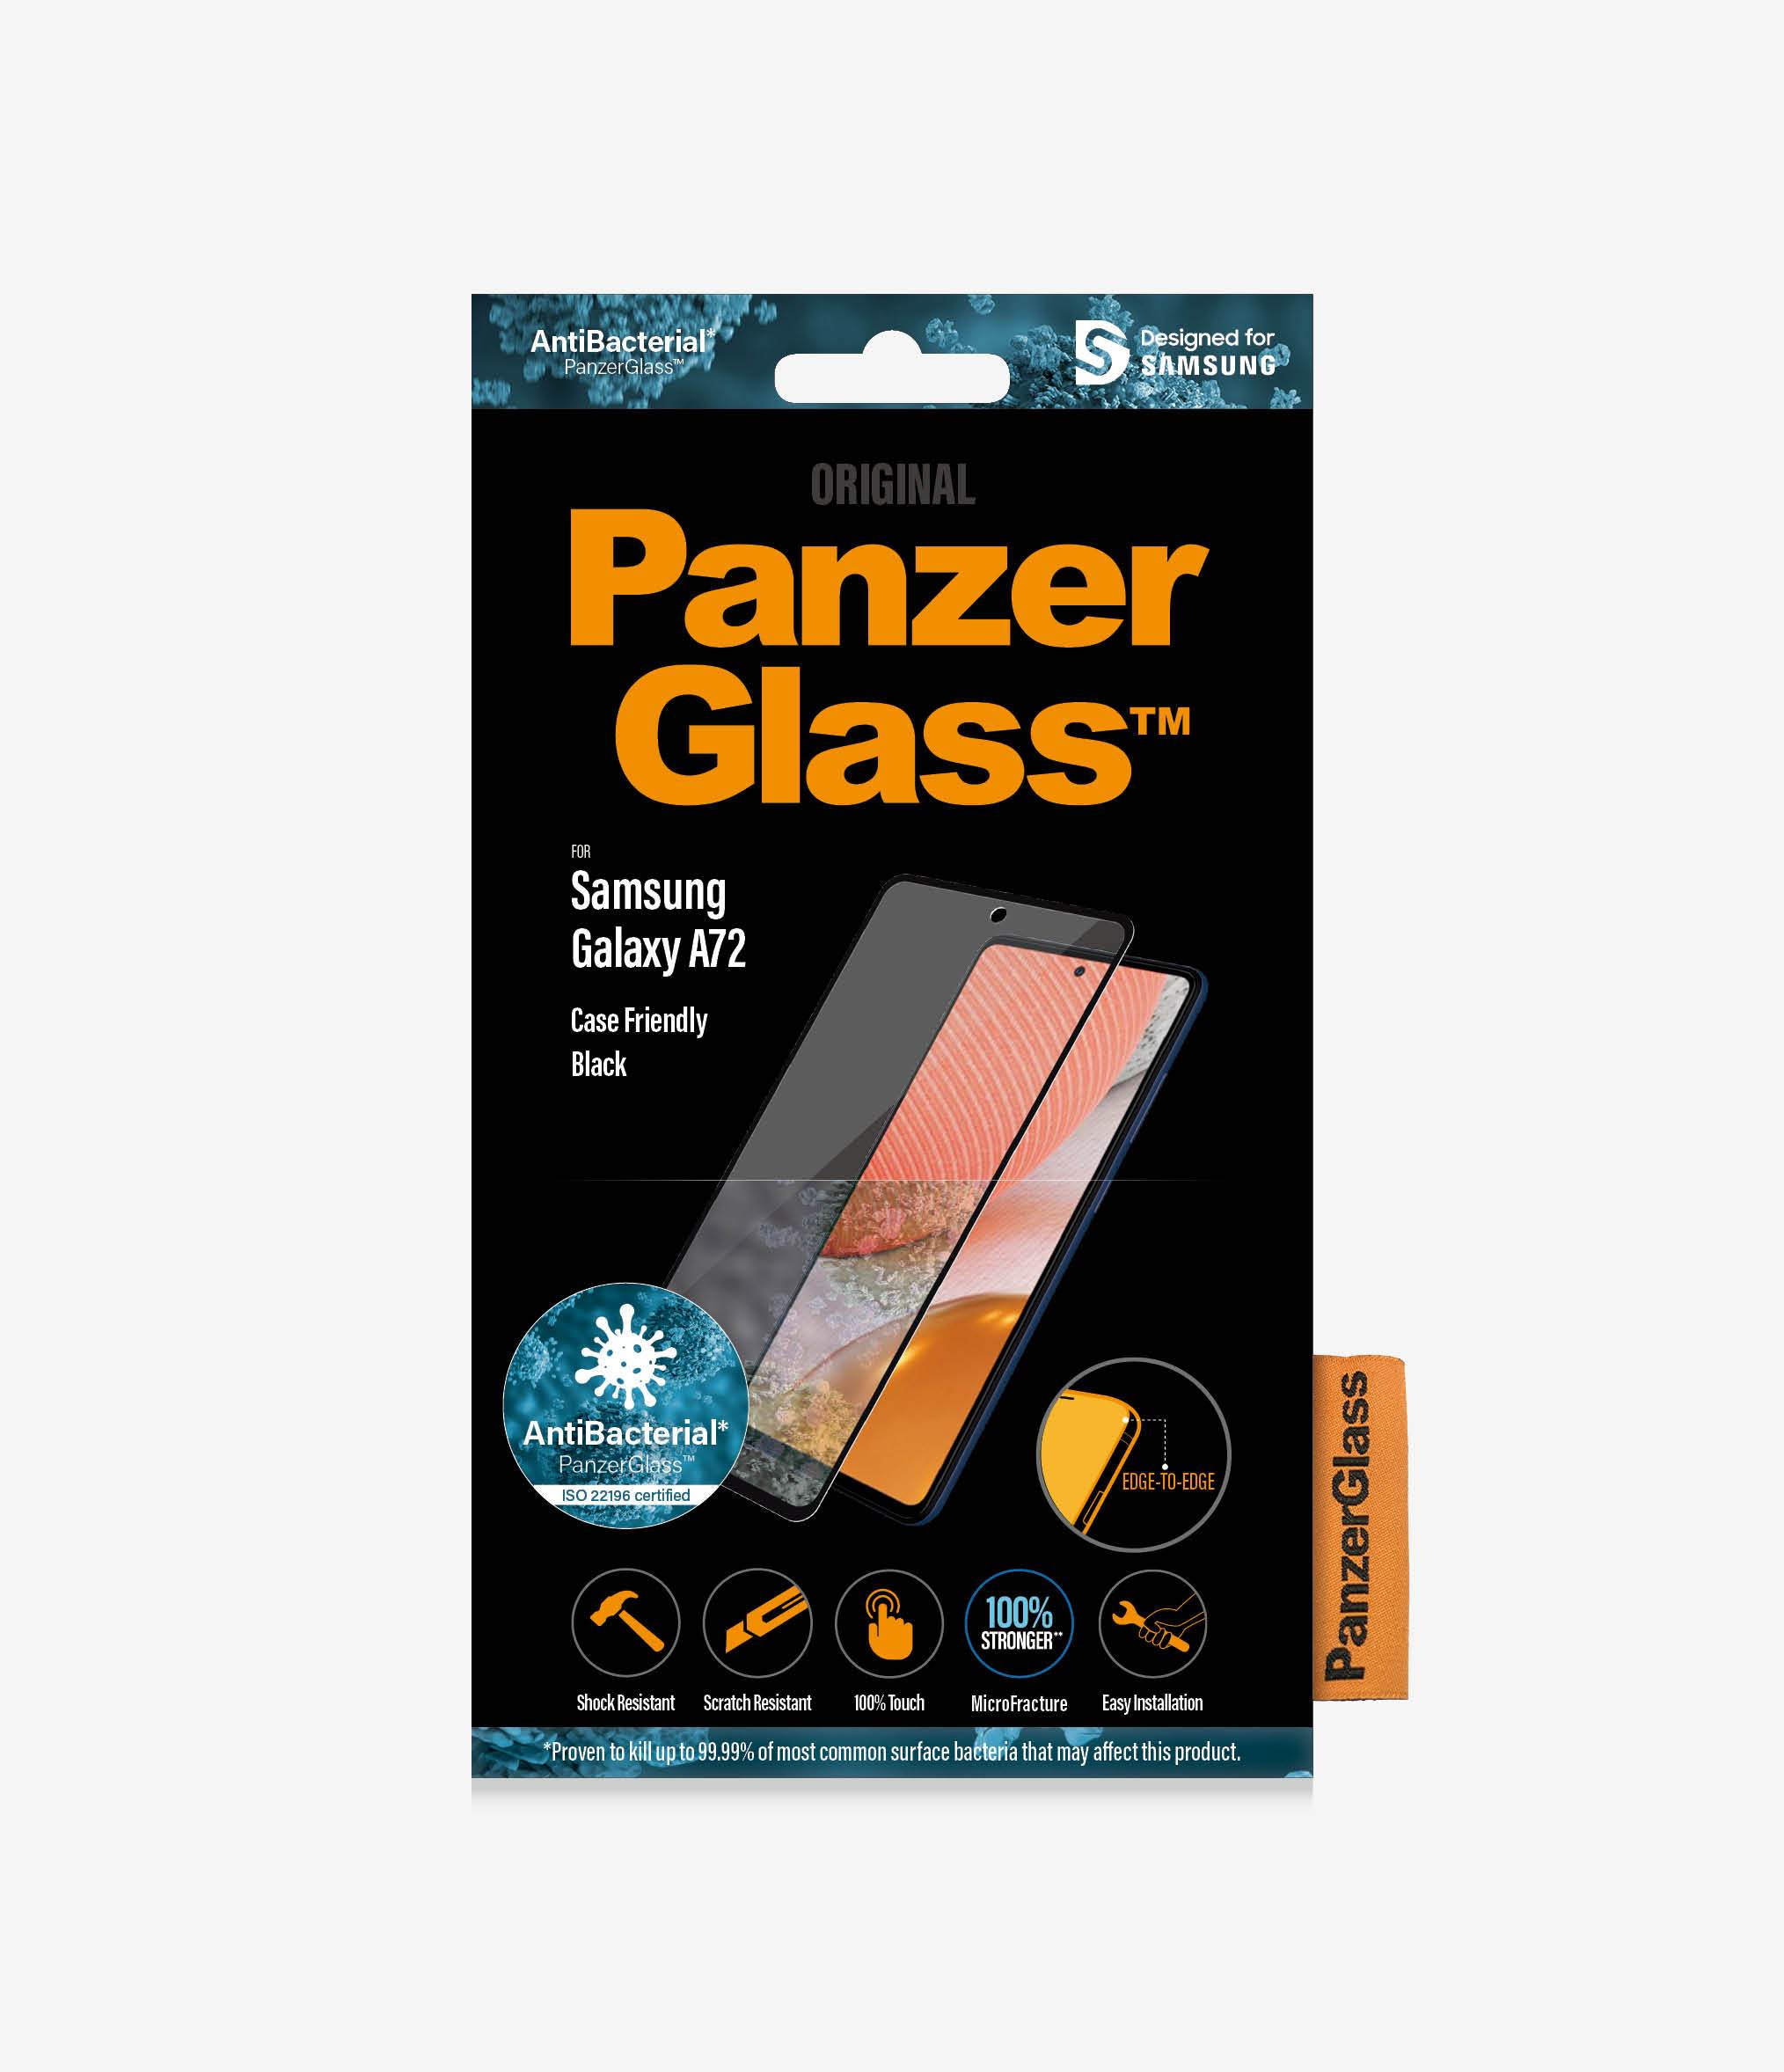 PanzerGlass™ Samsung Galaxy A72 - Black (7255) - Antibacterial - Screen Protector - Full frame coverage, Rounded edges, Crystal clear, 100% touch